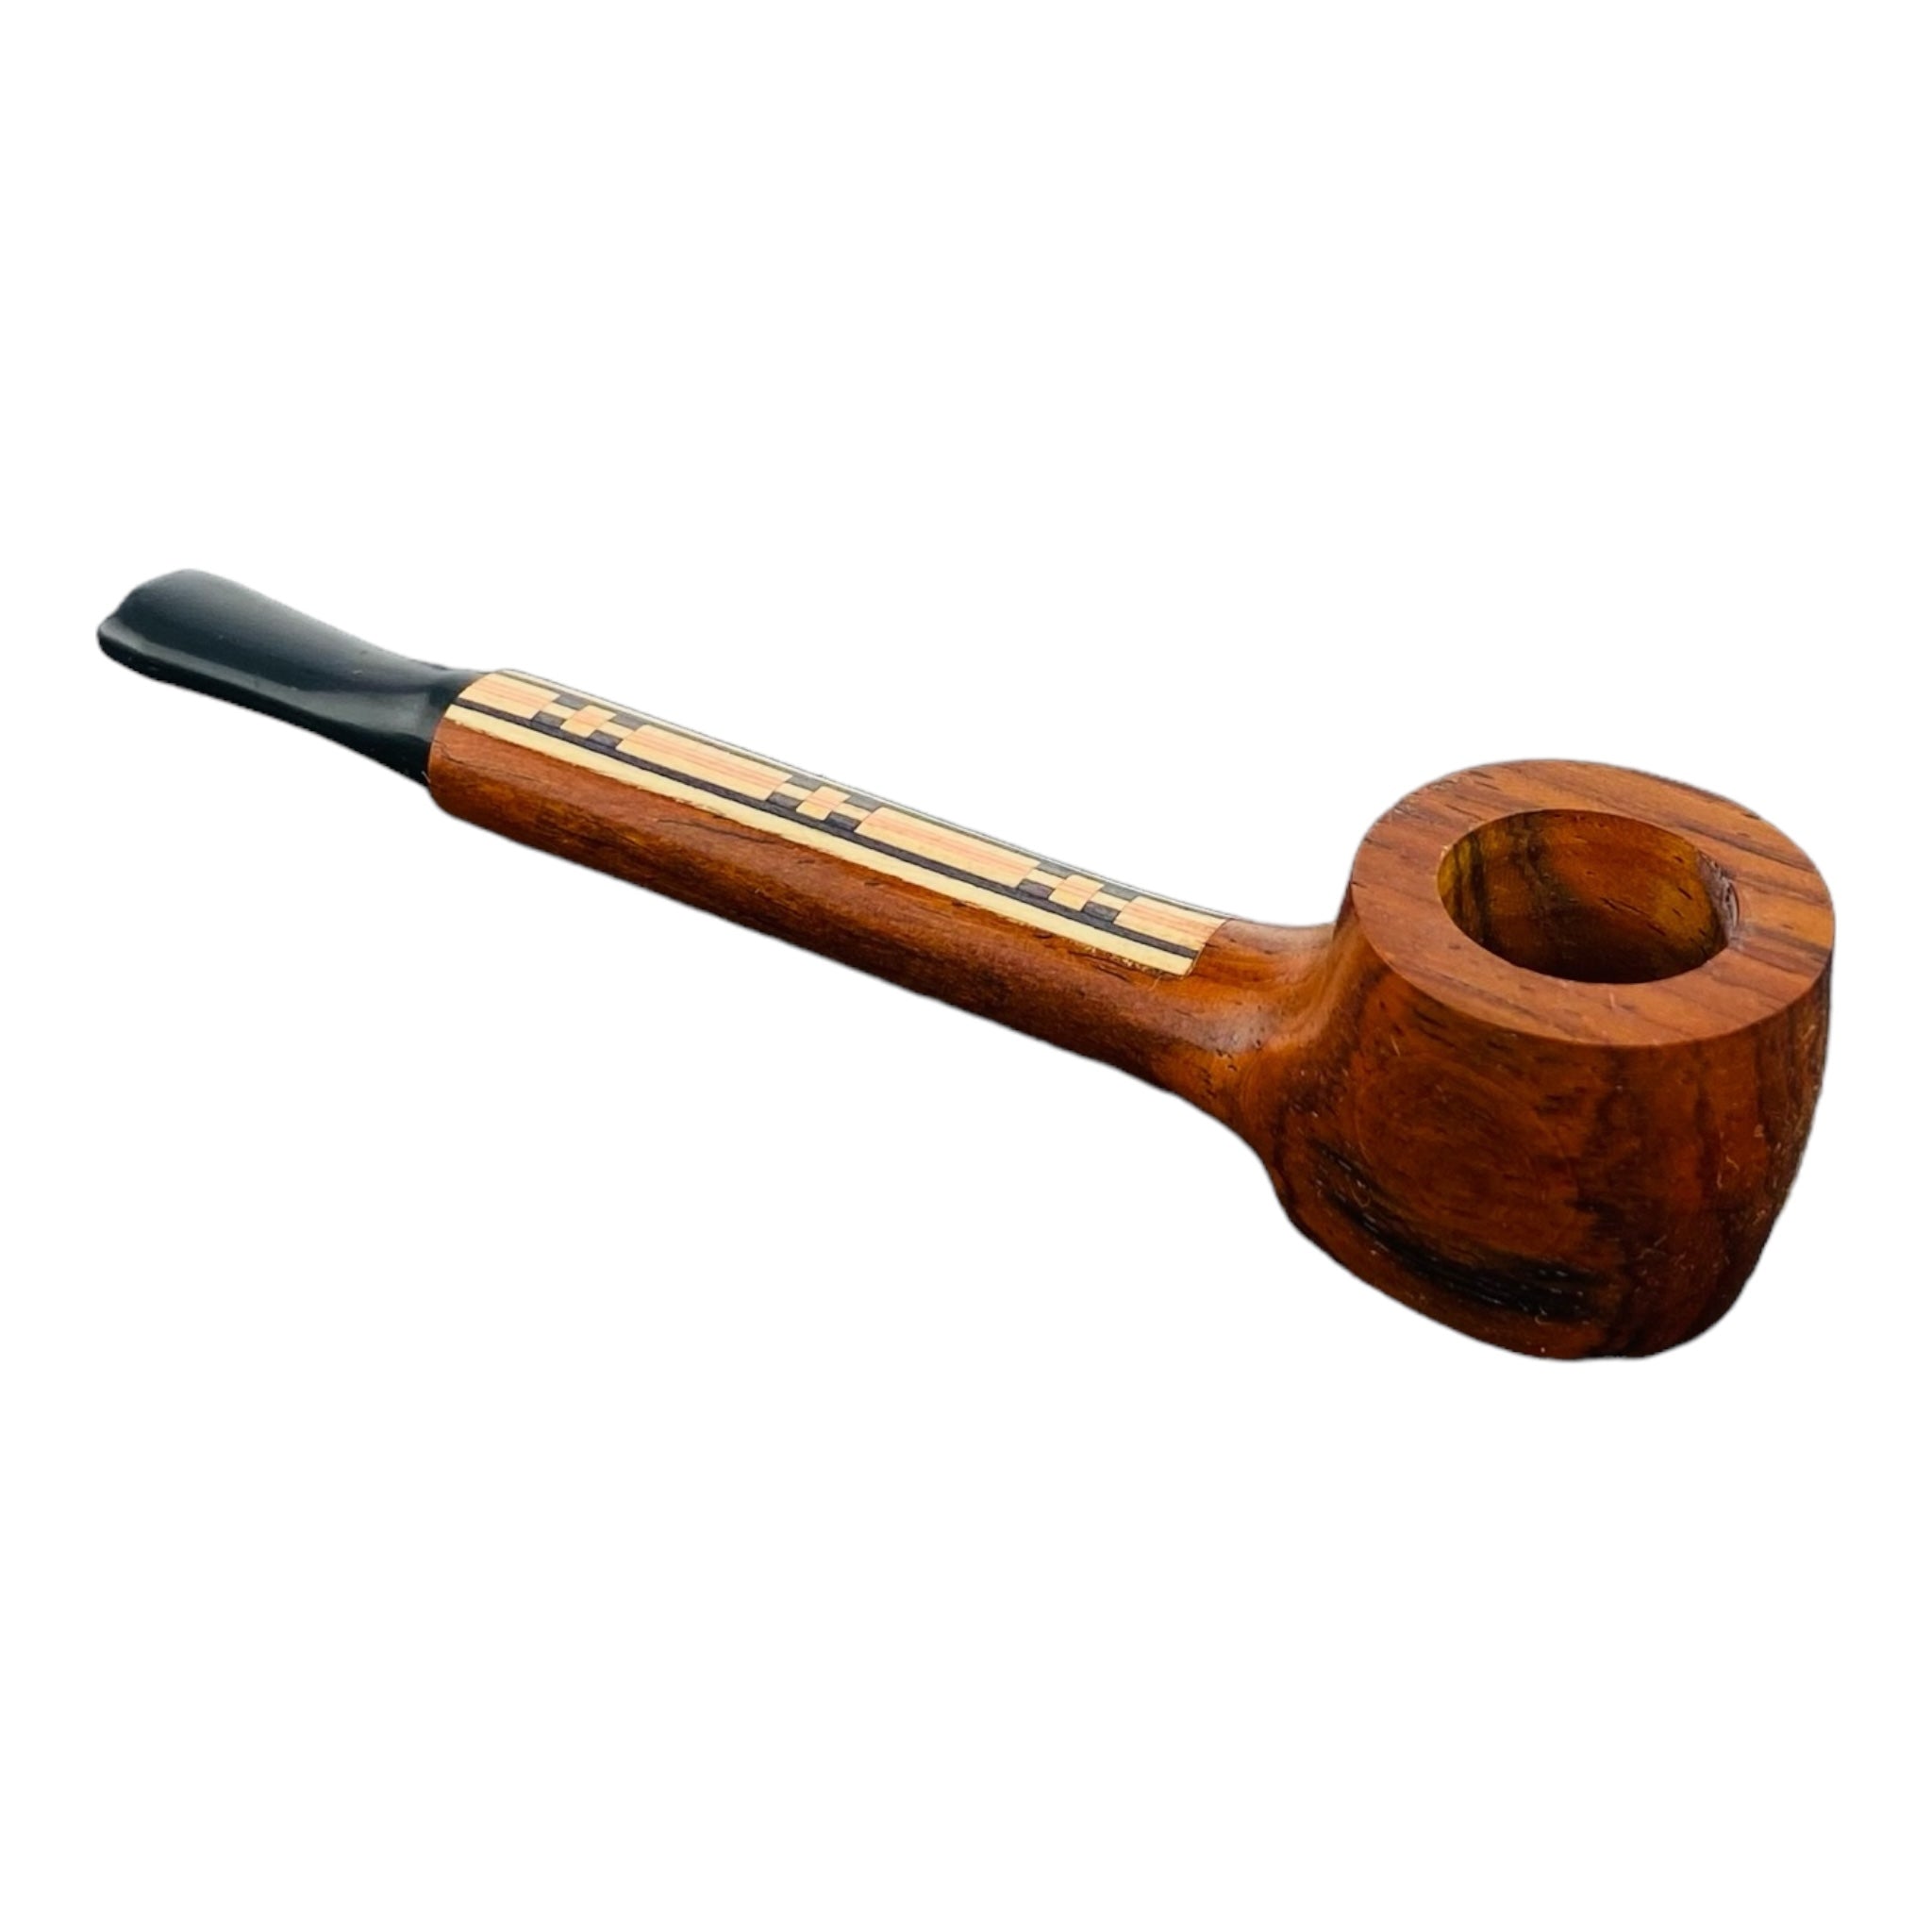 Wood Hand Pipe - Long Skinny Stem With Wood Inlay And Plastic Mouthpiece for weed and tobacco